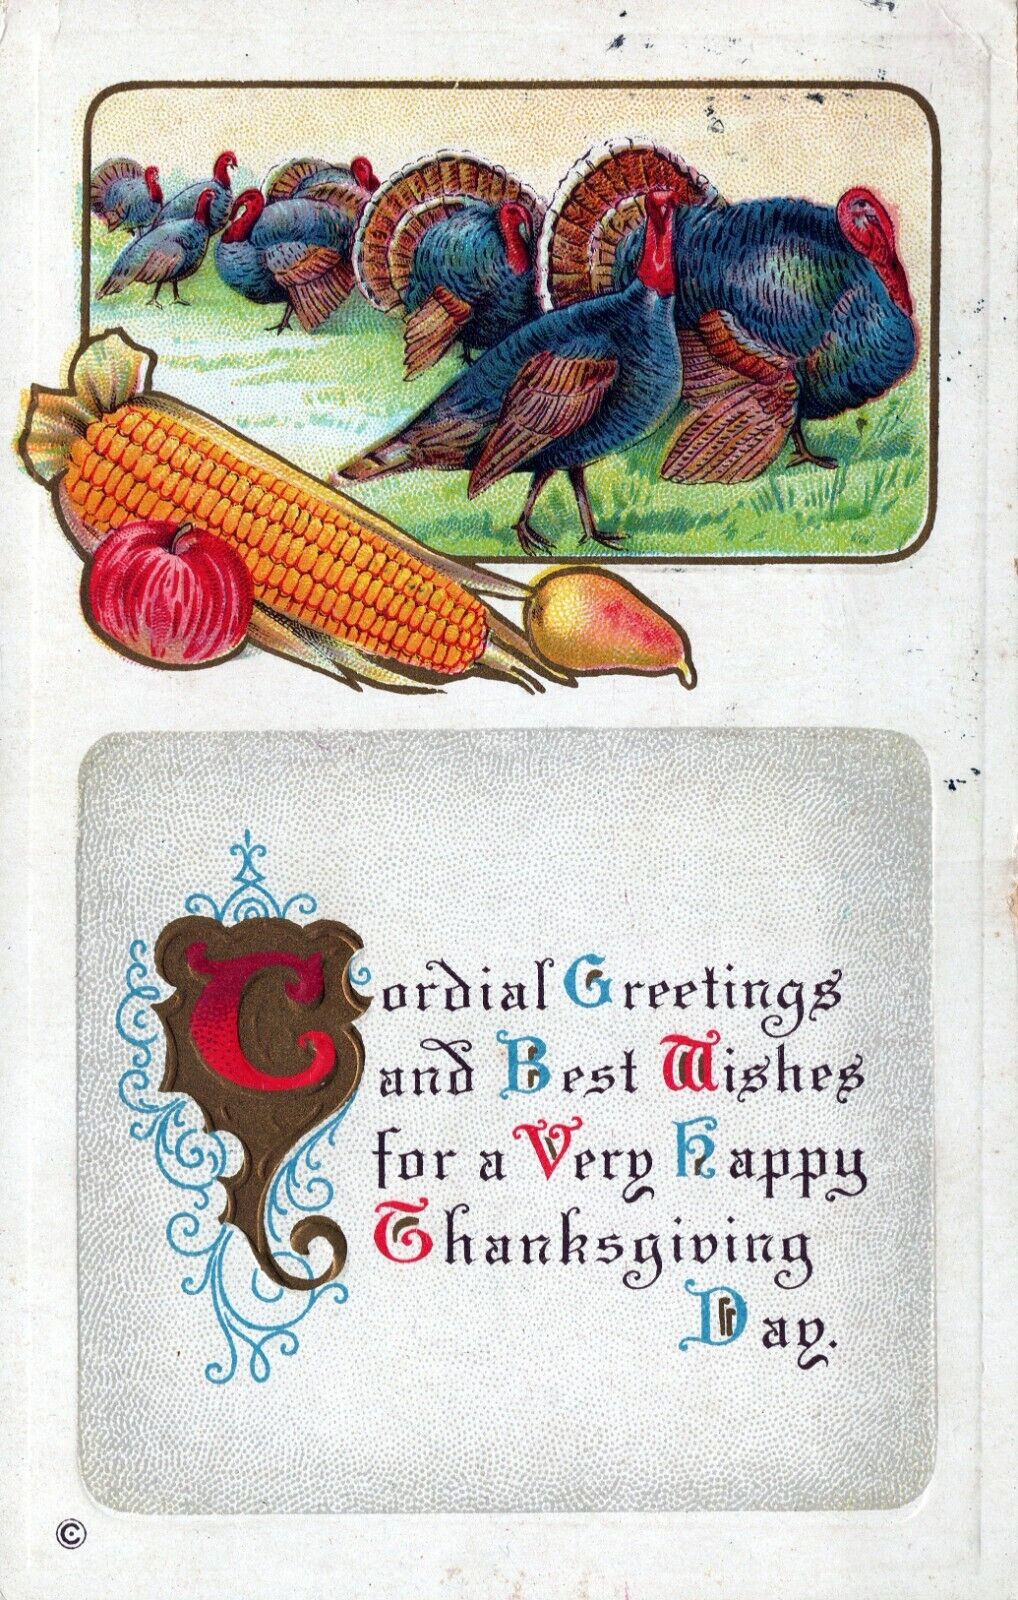  Thanksgiving Day Greetings Posted in 1913 Embossed Postcard